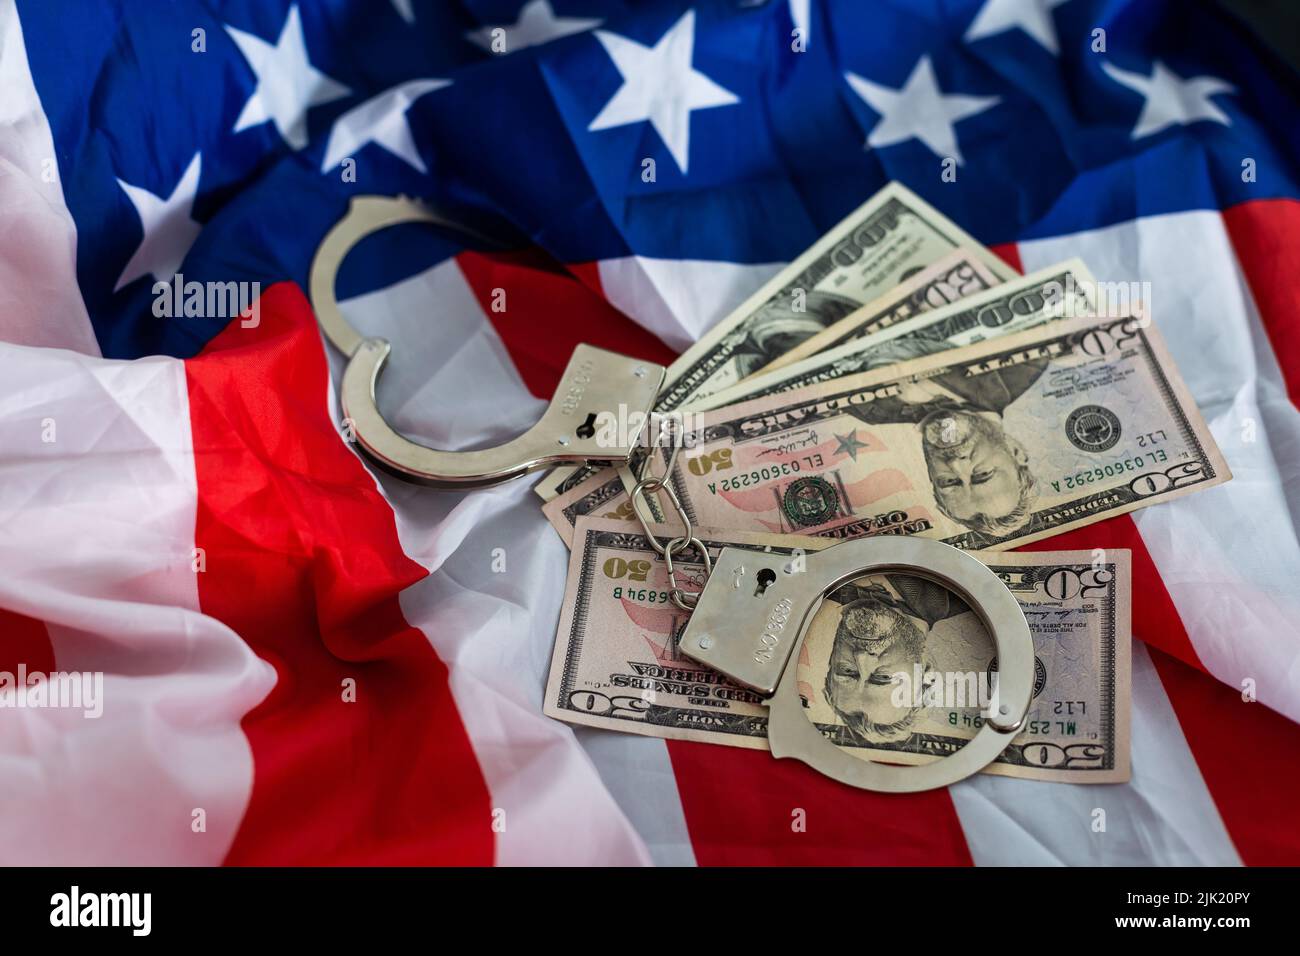 metal handcuff, american dollars cash over flag of USA. Illegal concept. Bribing and corruption Stock Photo